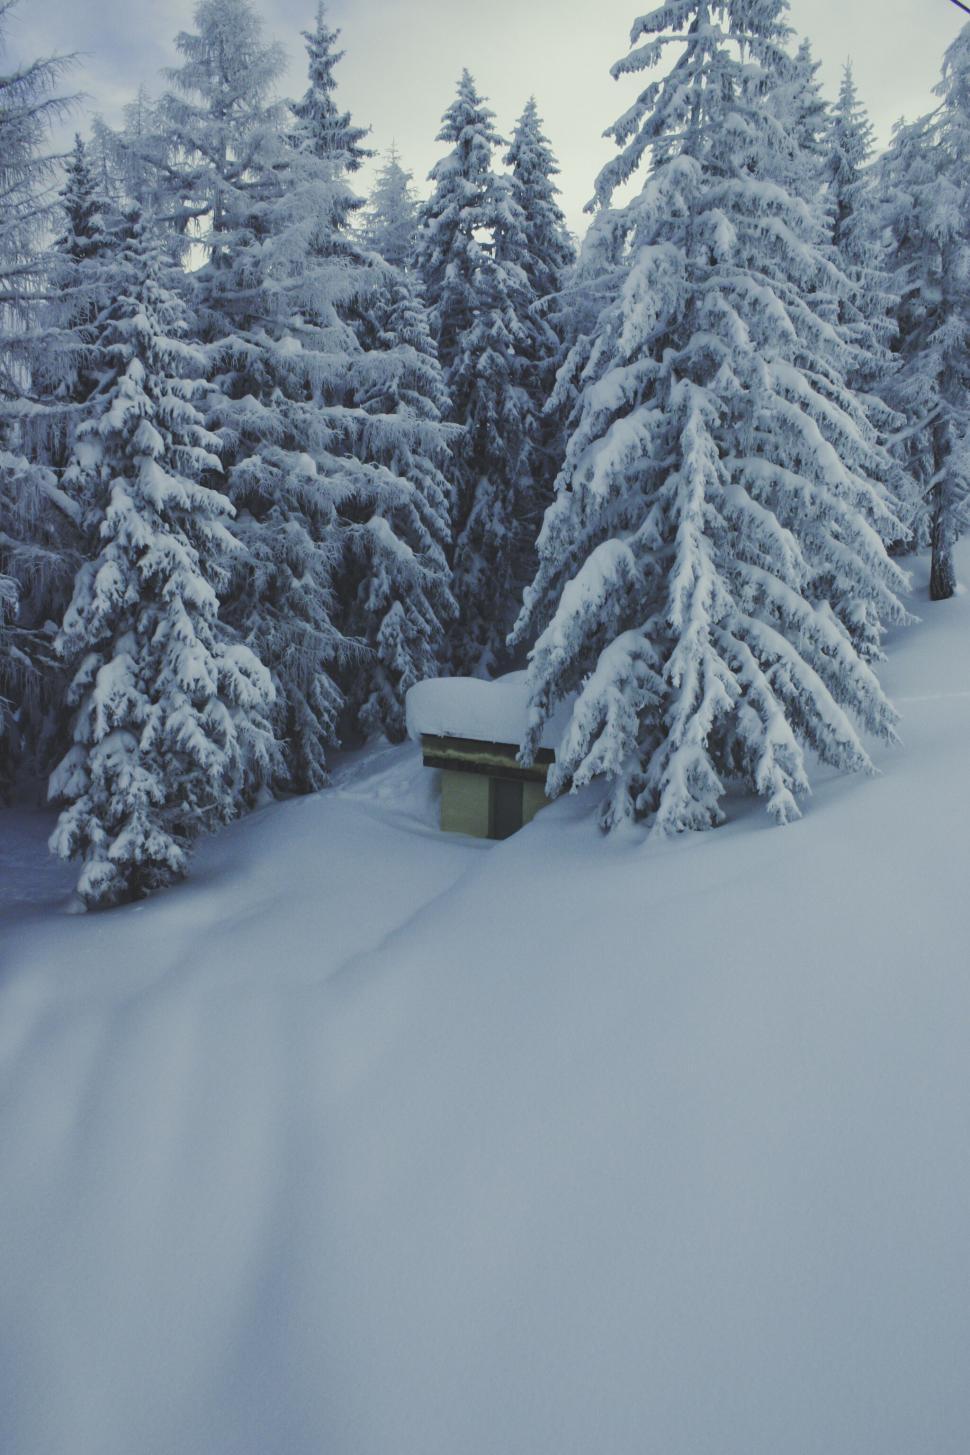 Free Image of Snow-covered trees and a hut in a winter wonderland 